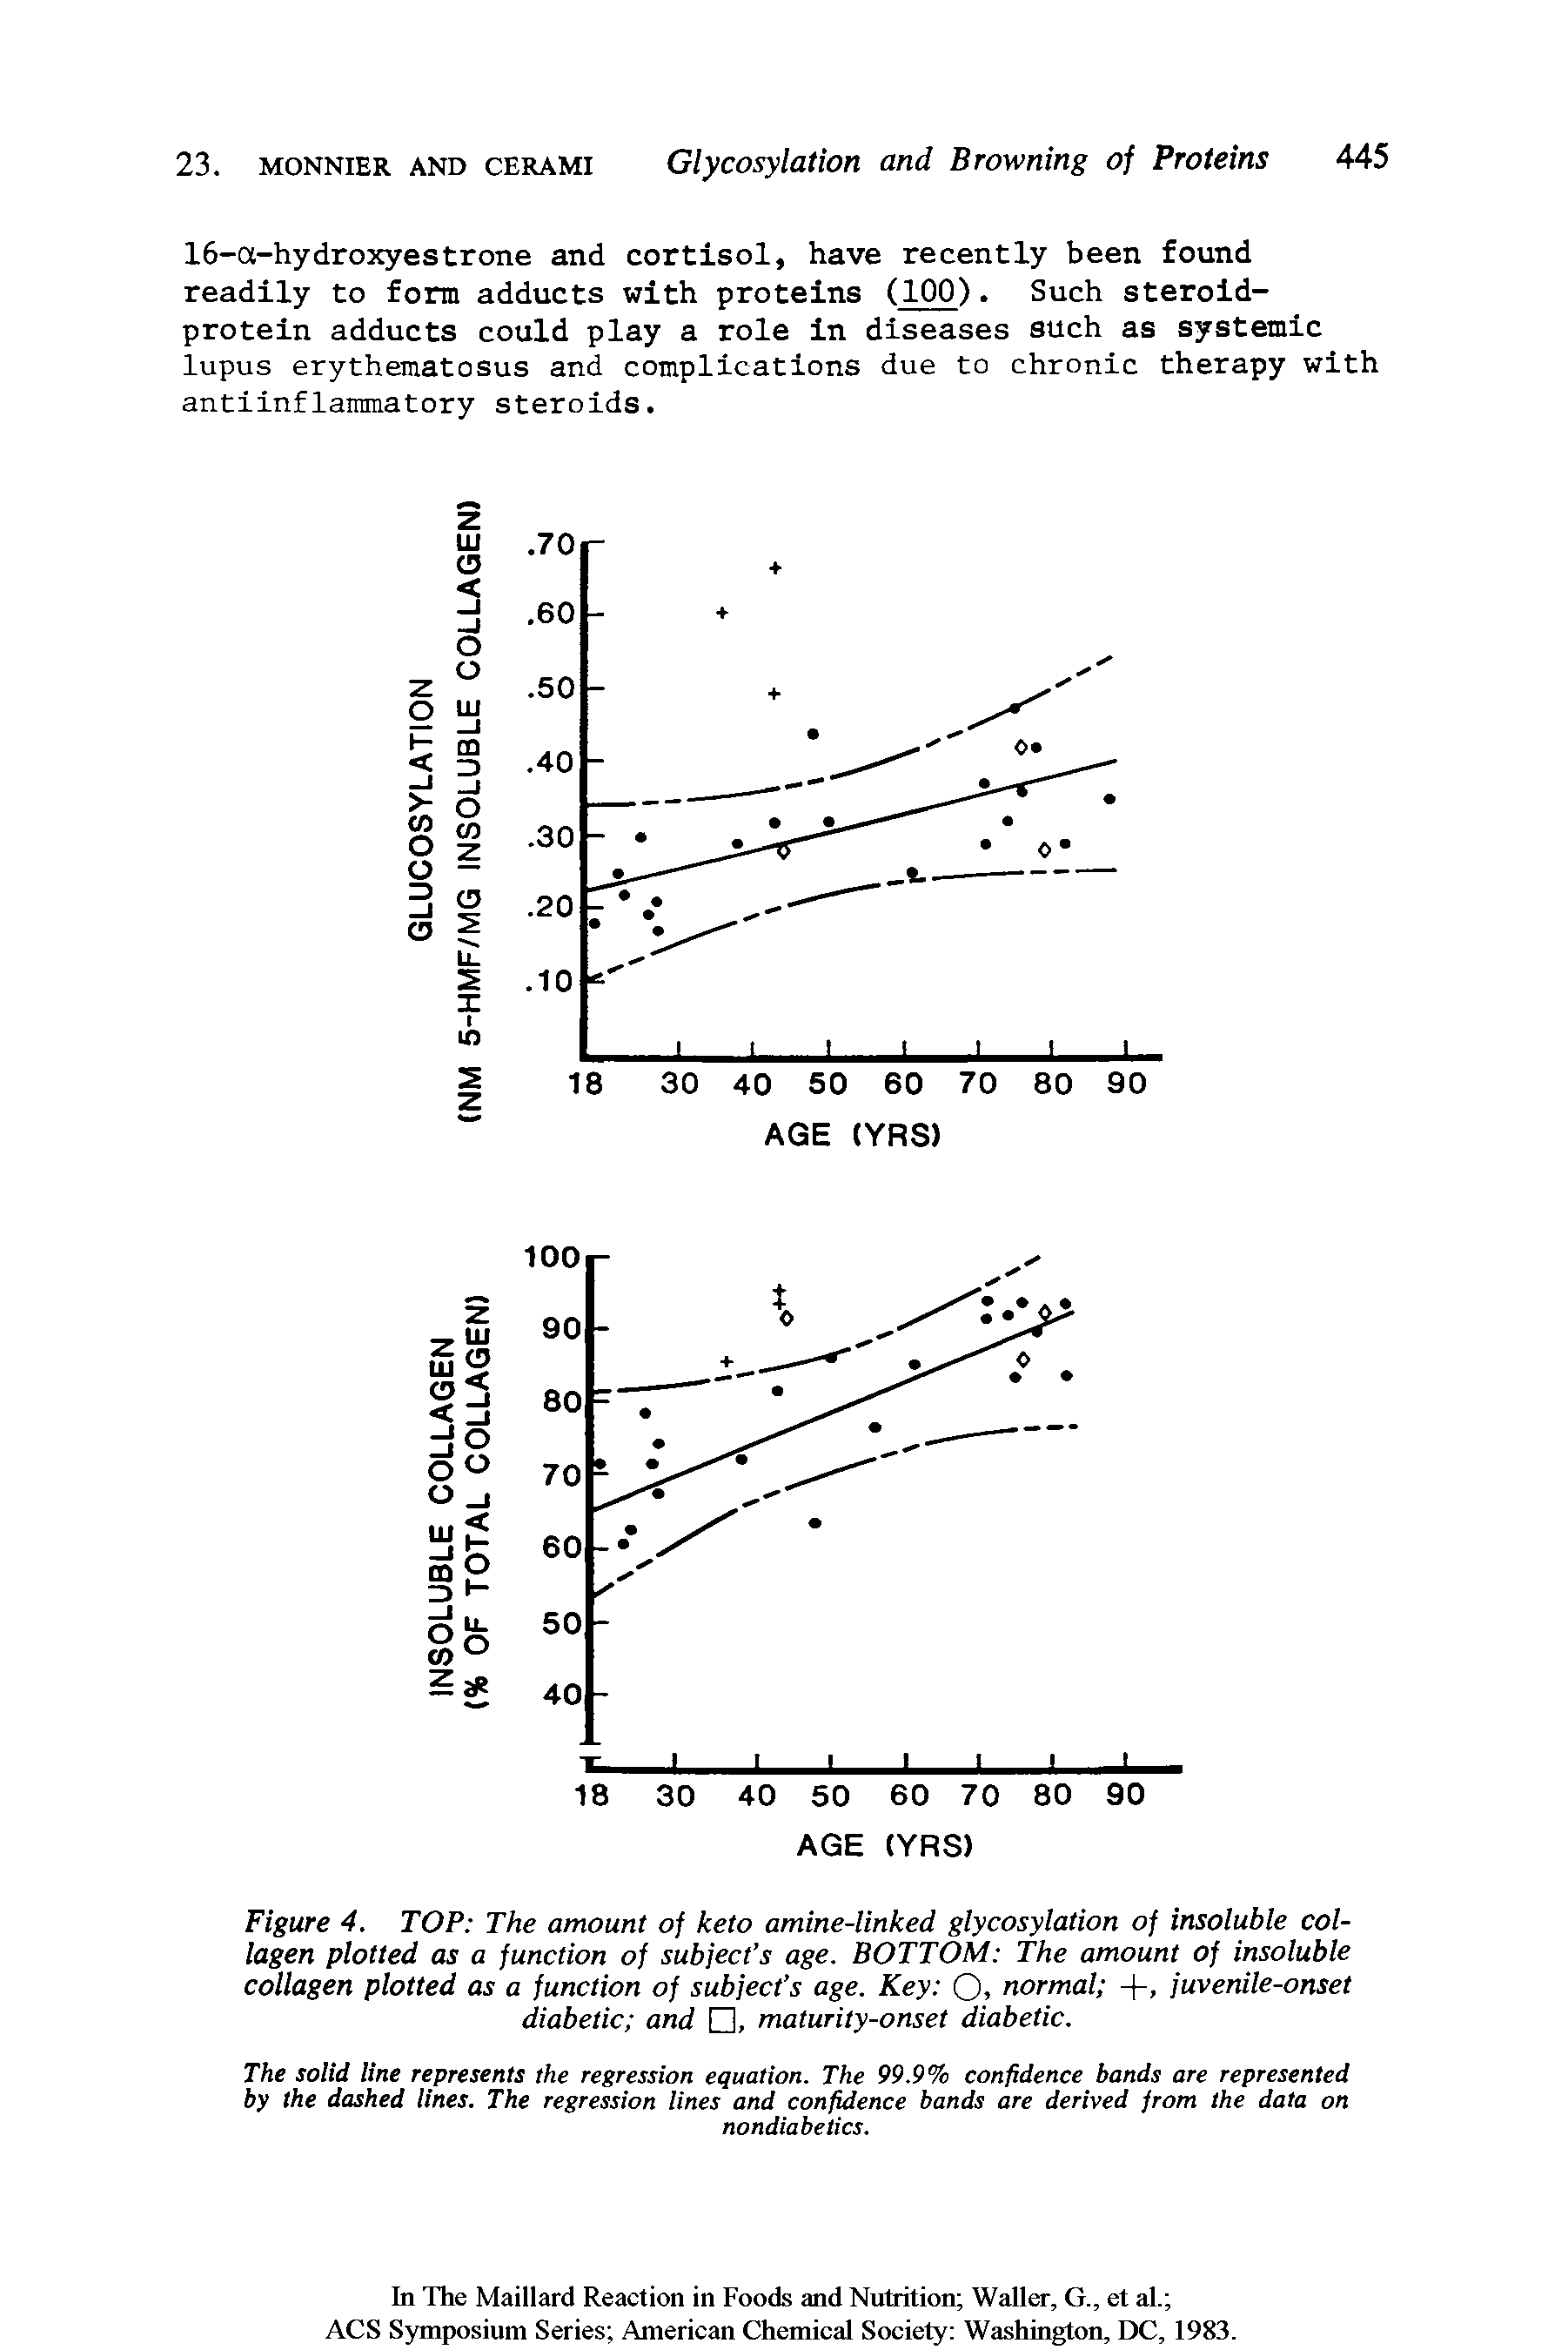 Figure 4. TOP The amount of keto amine-linked glycosylation of insoluble collagen plotted as a function of subject s age. BOTTOM The amount of insoluble collagen plotted as a function of subject s age. Key O. normal +, juvenile-onset diabetic and , maturity-onset diabetic.